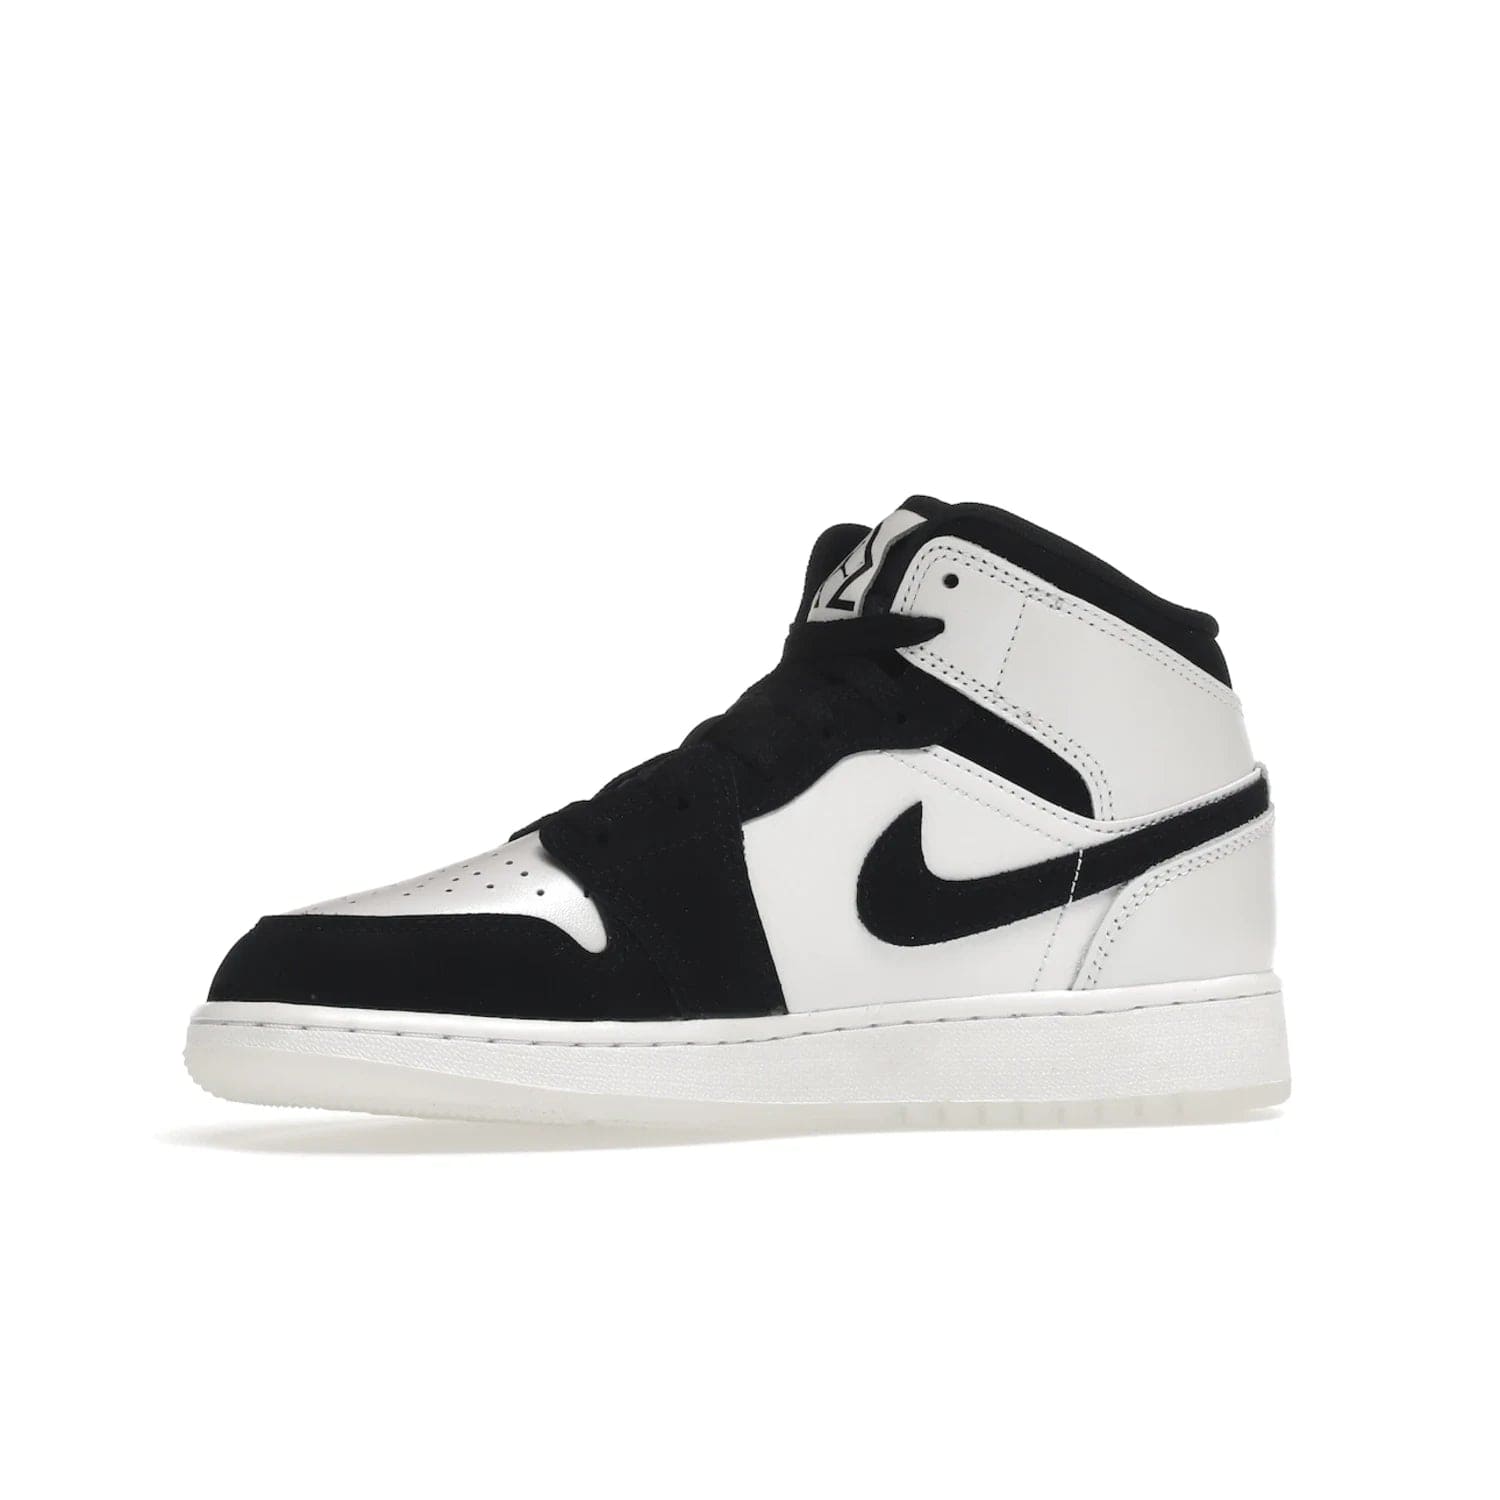 Jordan 1 Mid Diamond Shorts (GS) - Image 17 - Only at www.BallersClubKickz.com - Get the Jordan 1 Mid Diamond Shorts GS on 9th Feb 2022! Features a white, black & suede design with nylon tongue, stamped wings logo, rubber midsole & outsole. Only $100!